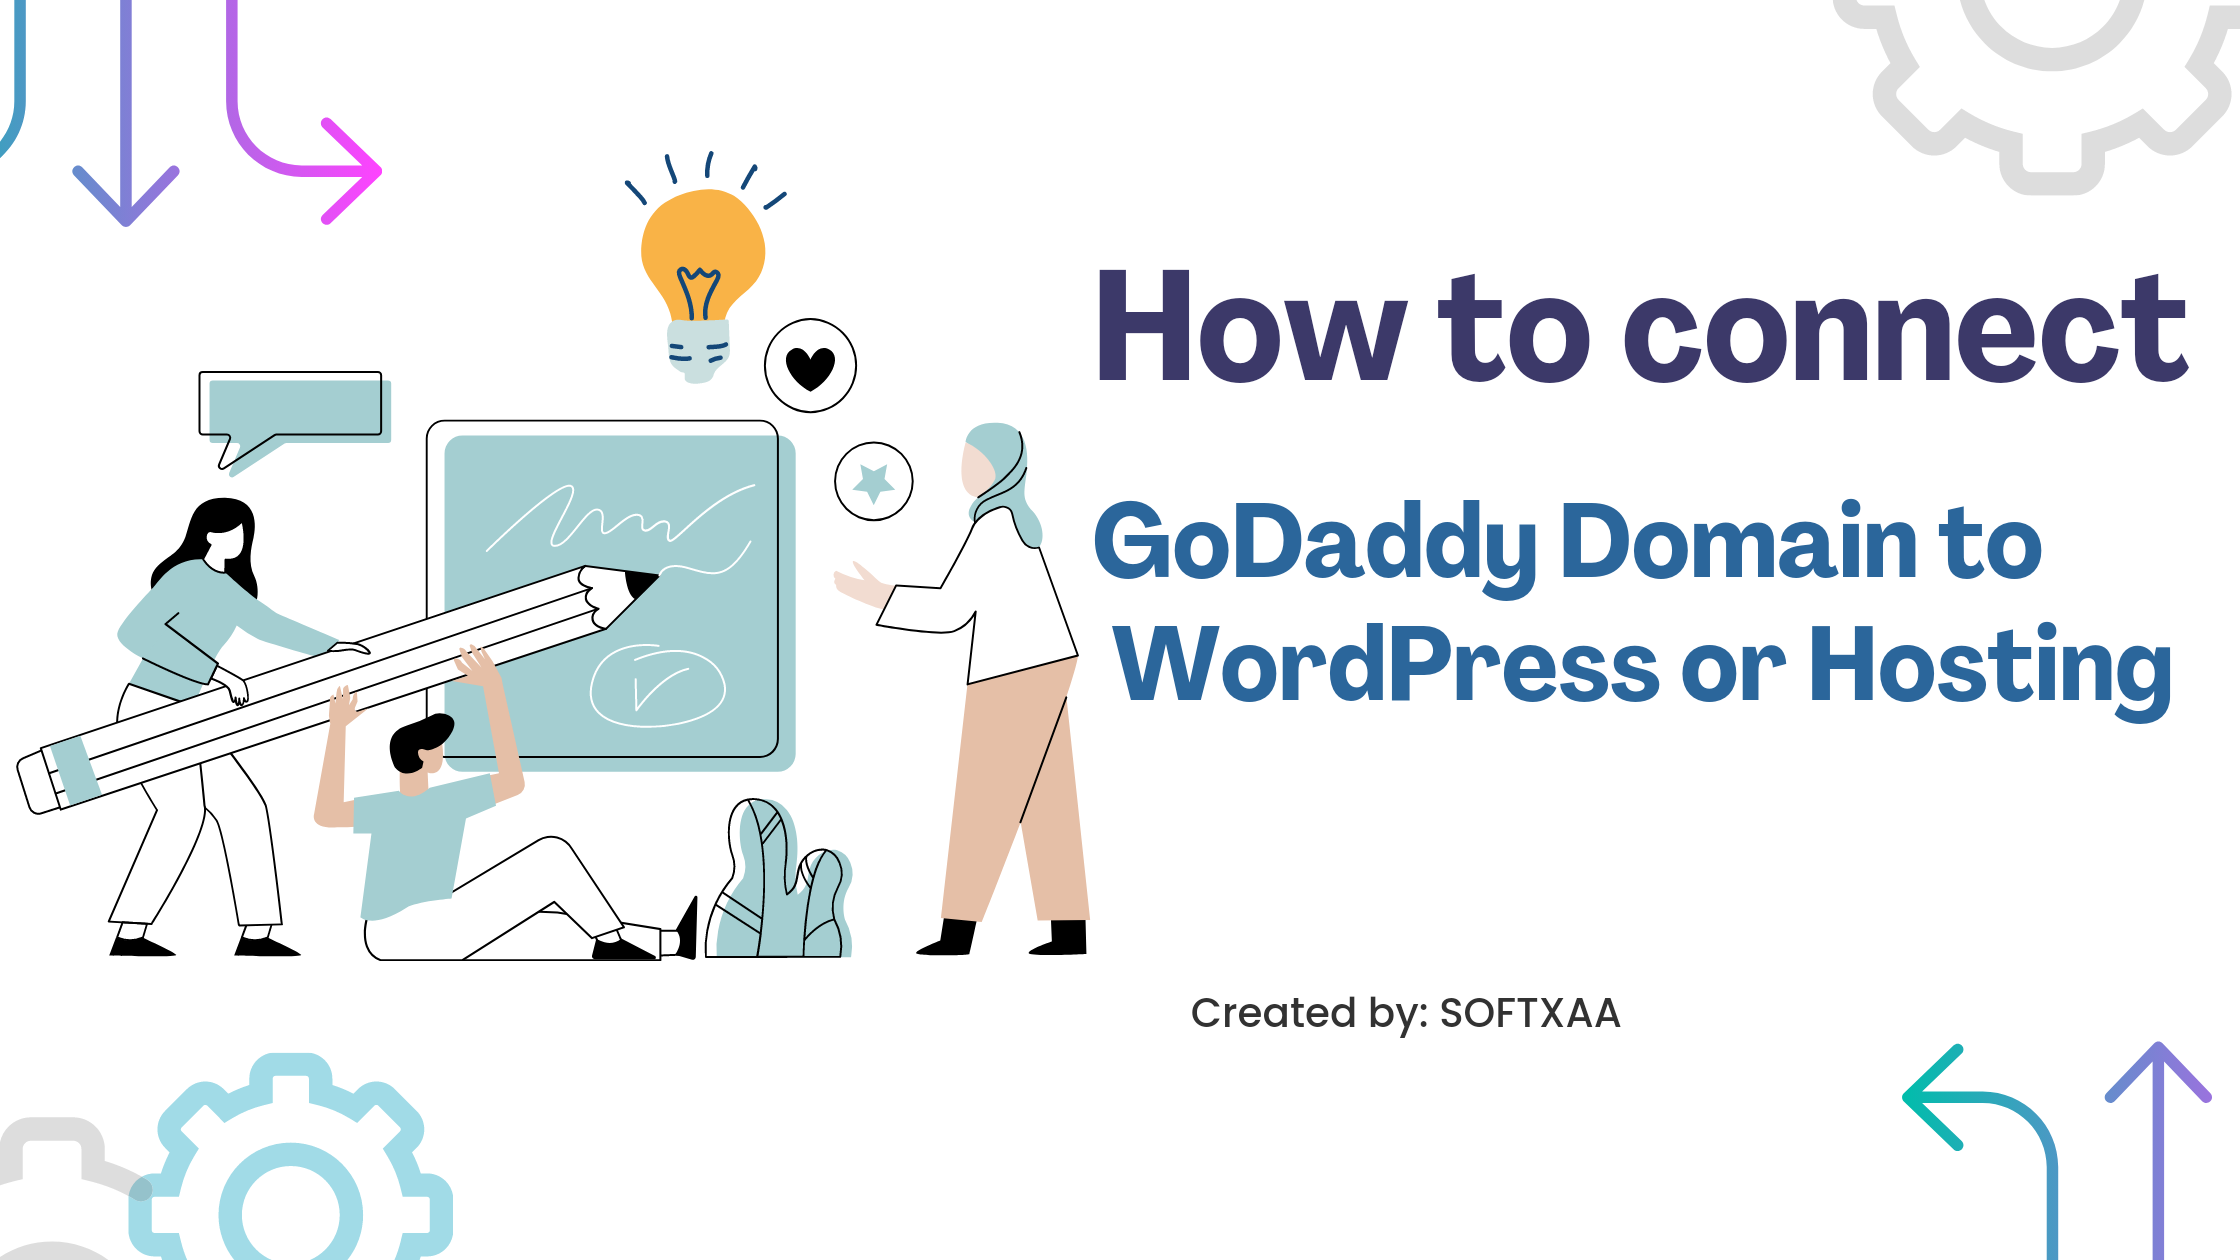 How to Connect GoDaddy Domain to WordPress or Web Hosting Effectively